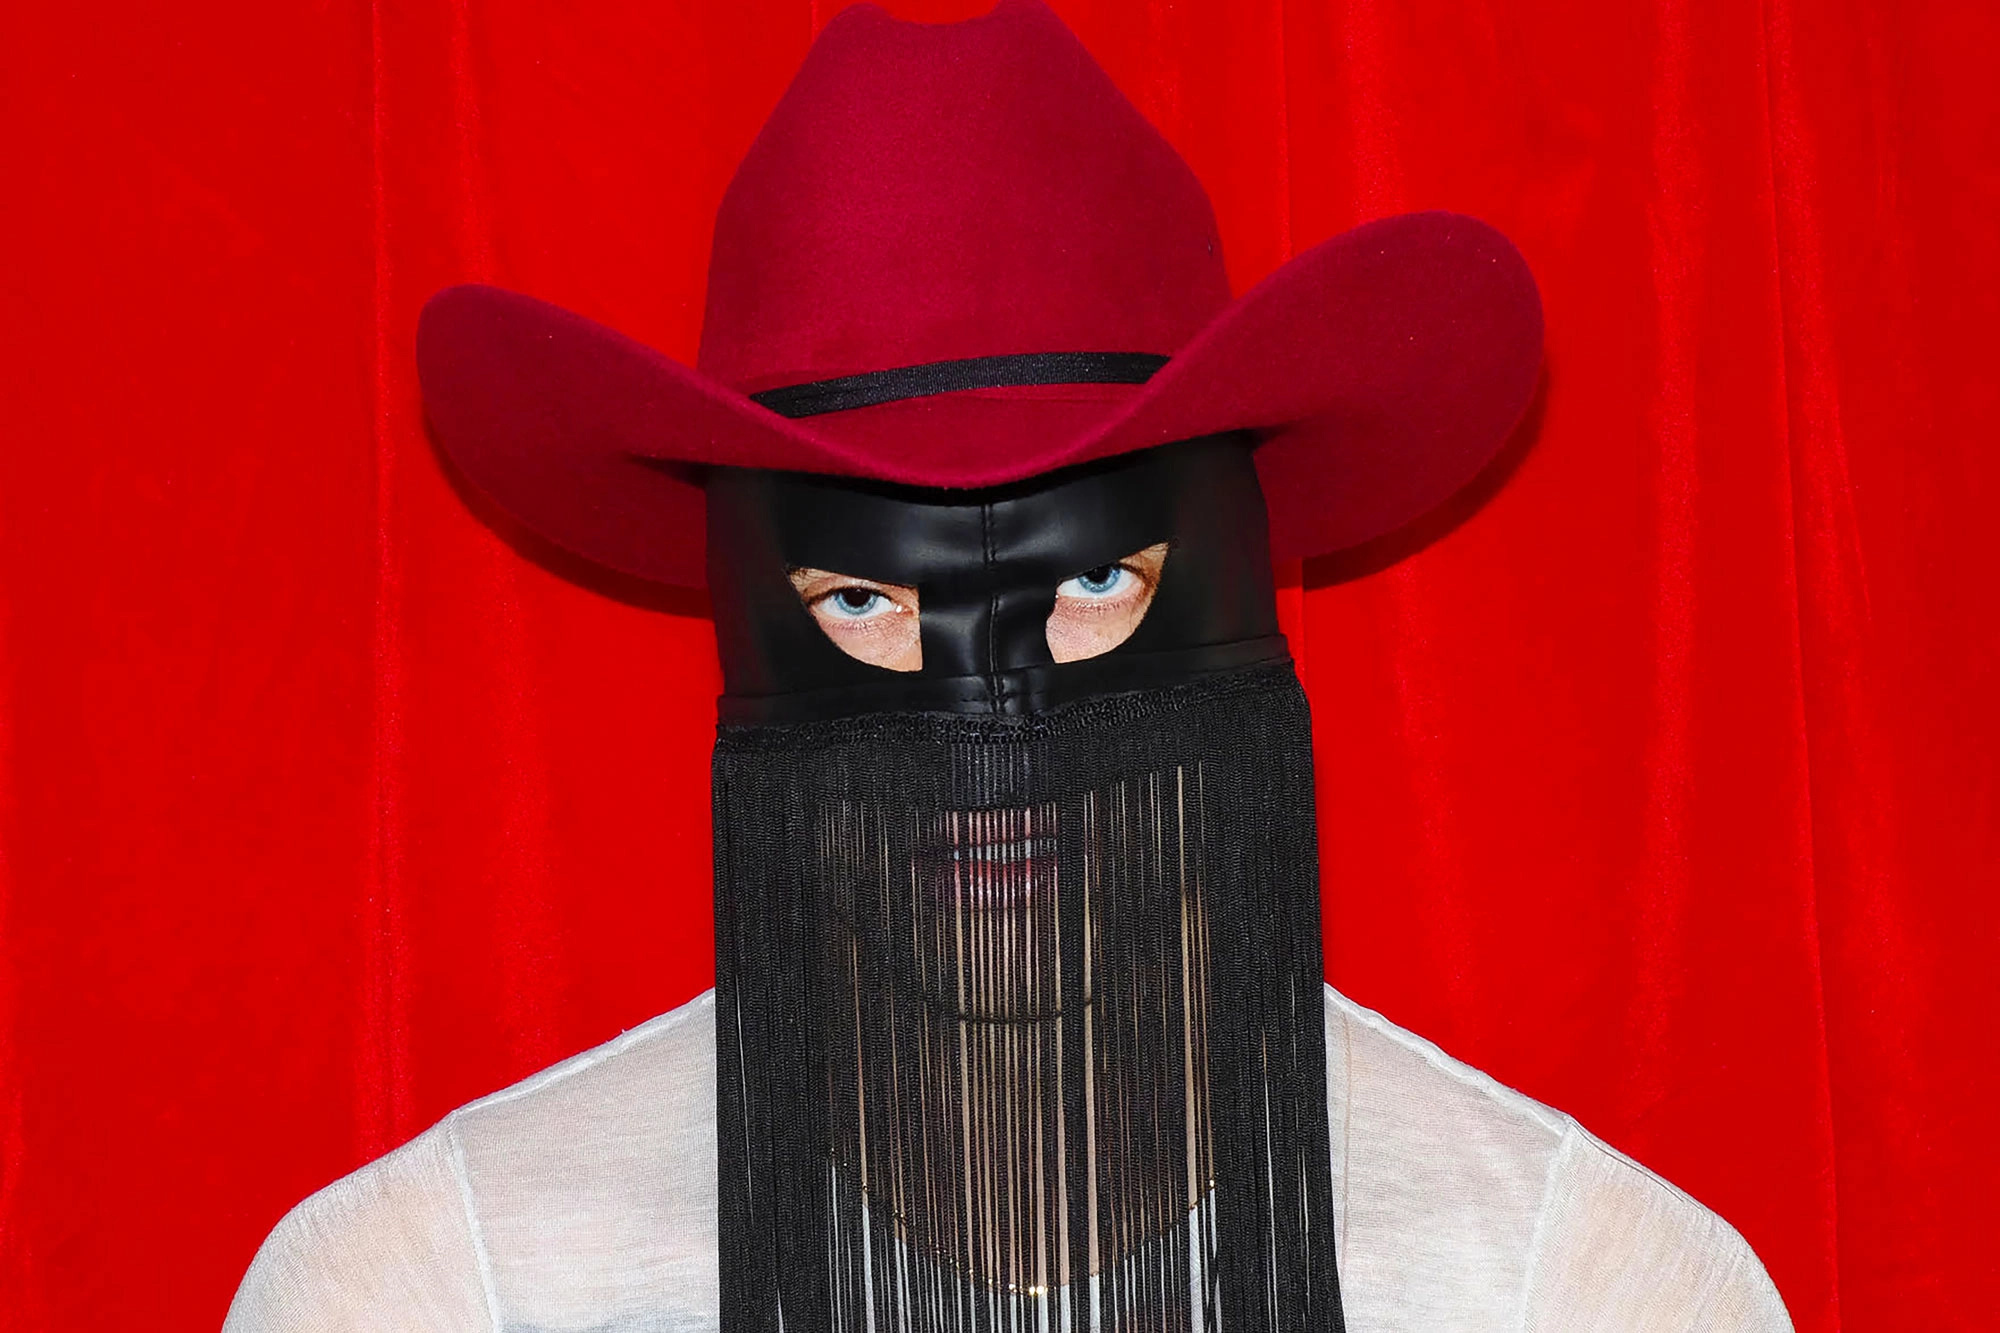 Orville Peck - Upcoming release, Exciting news, Dork magazine feature, Anticipation builds, 2000x1340 HD Desktop